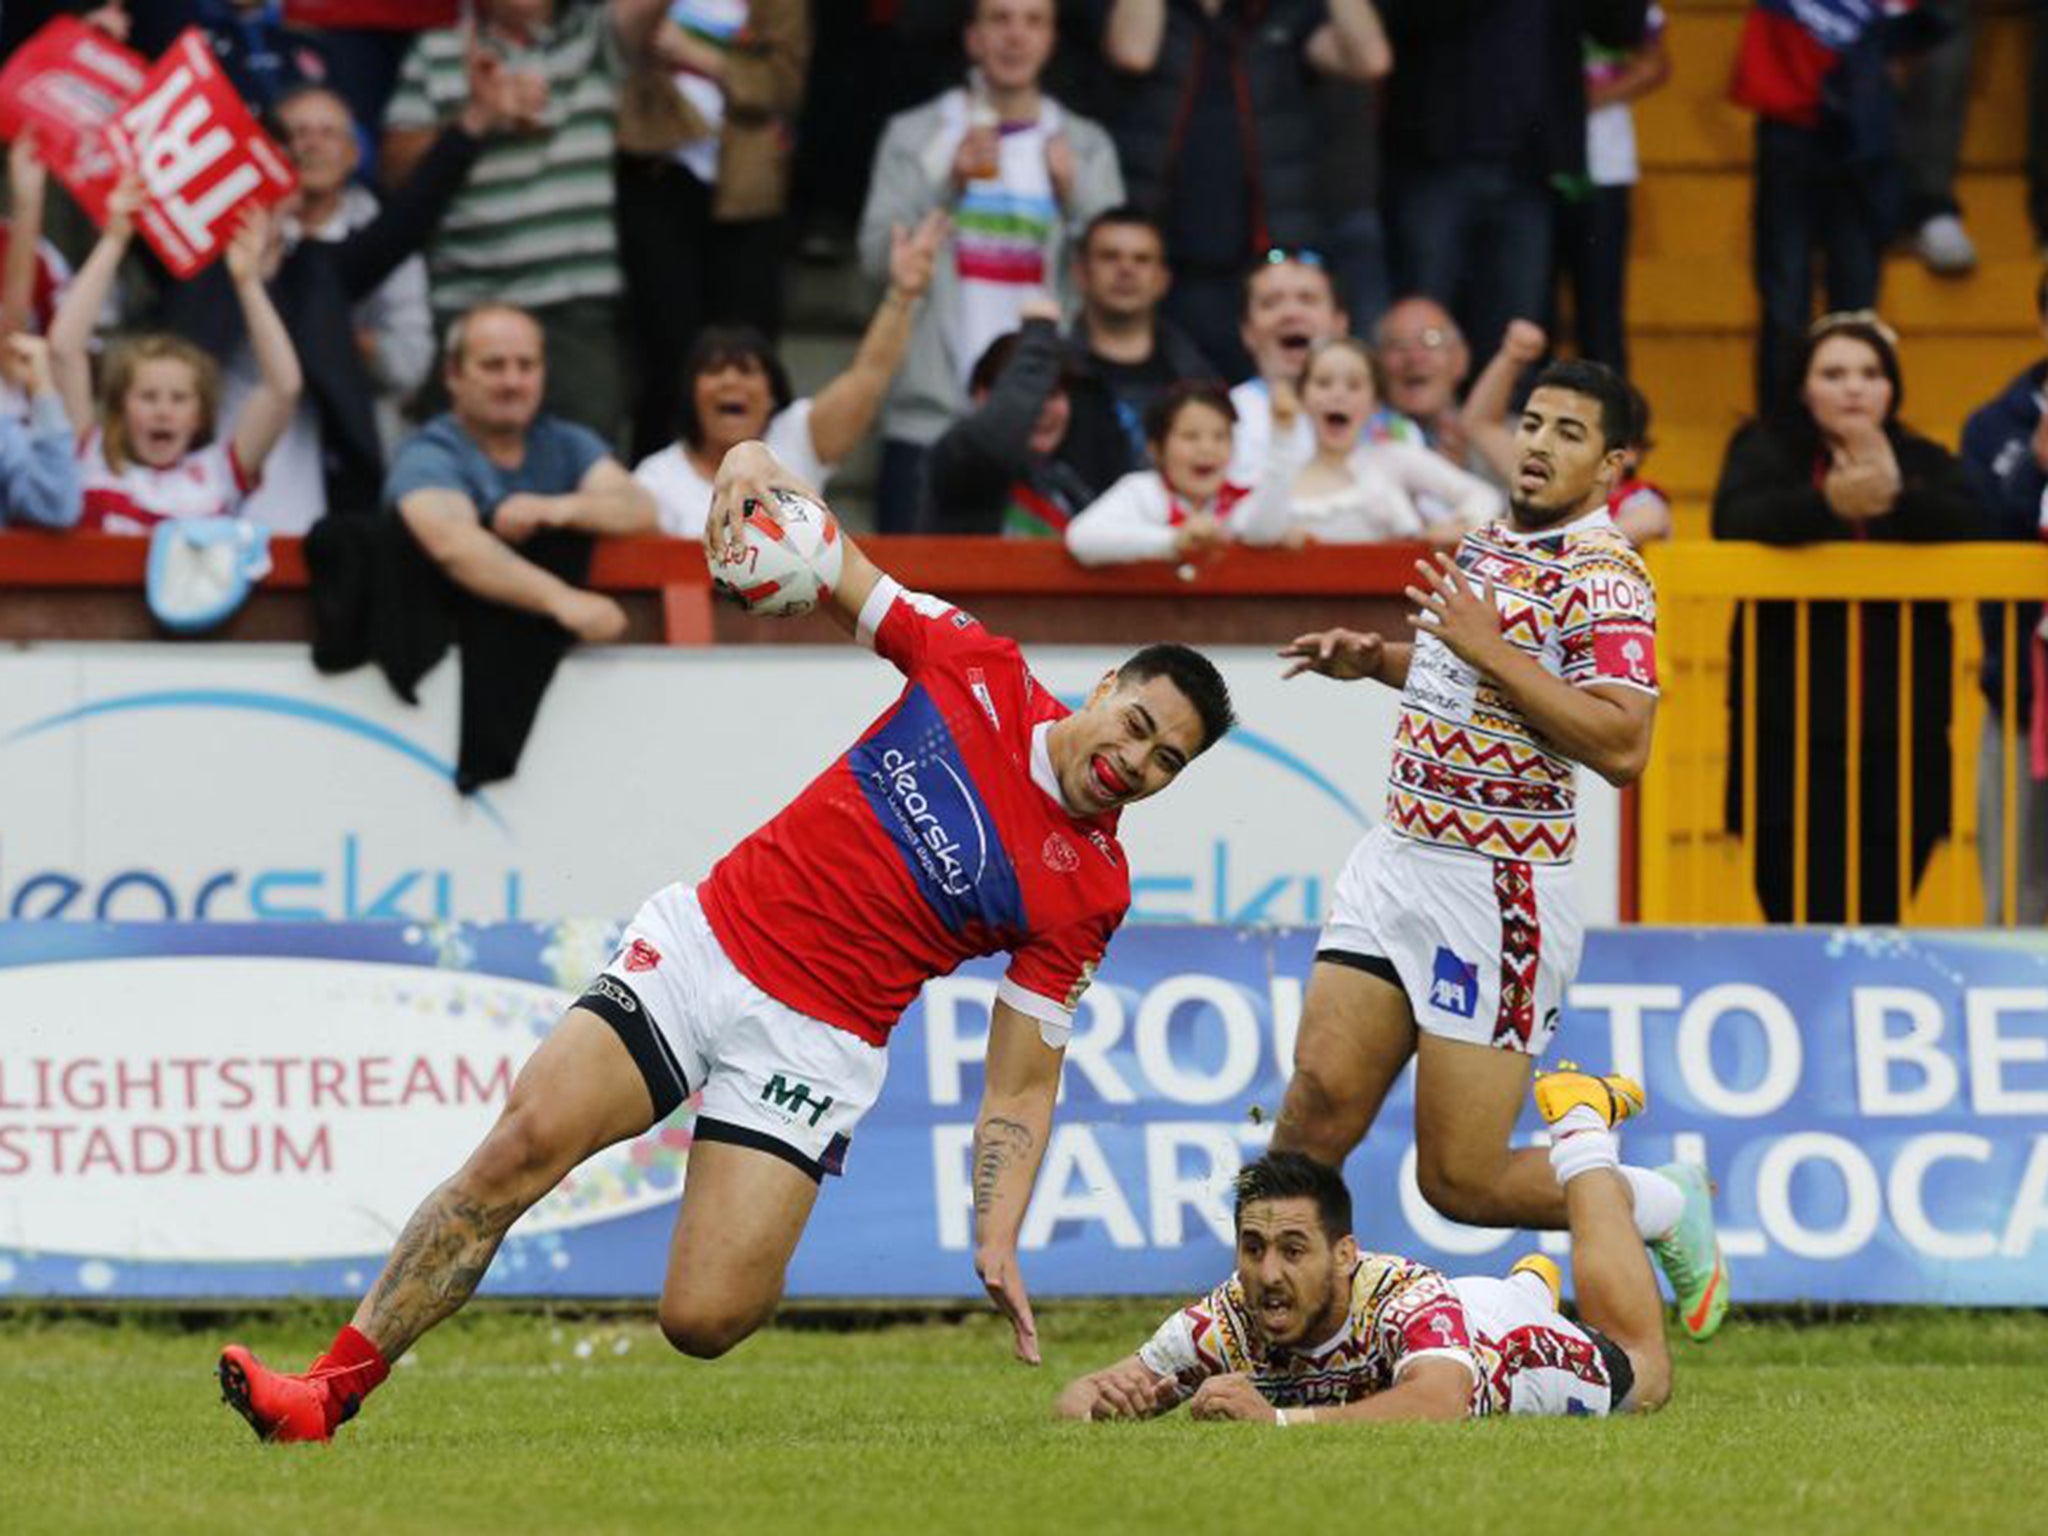 Ken Sio is now up to 17 tries for Hull KR this season after scoring twice last night